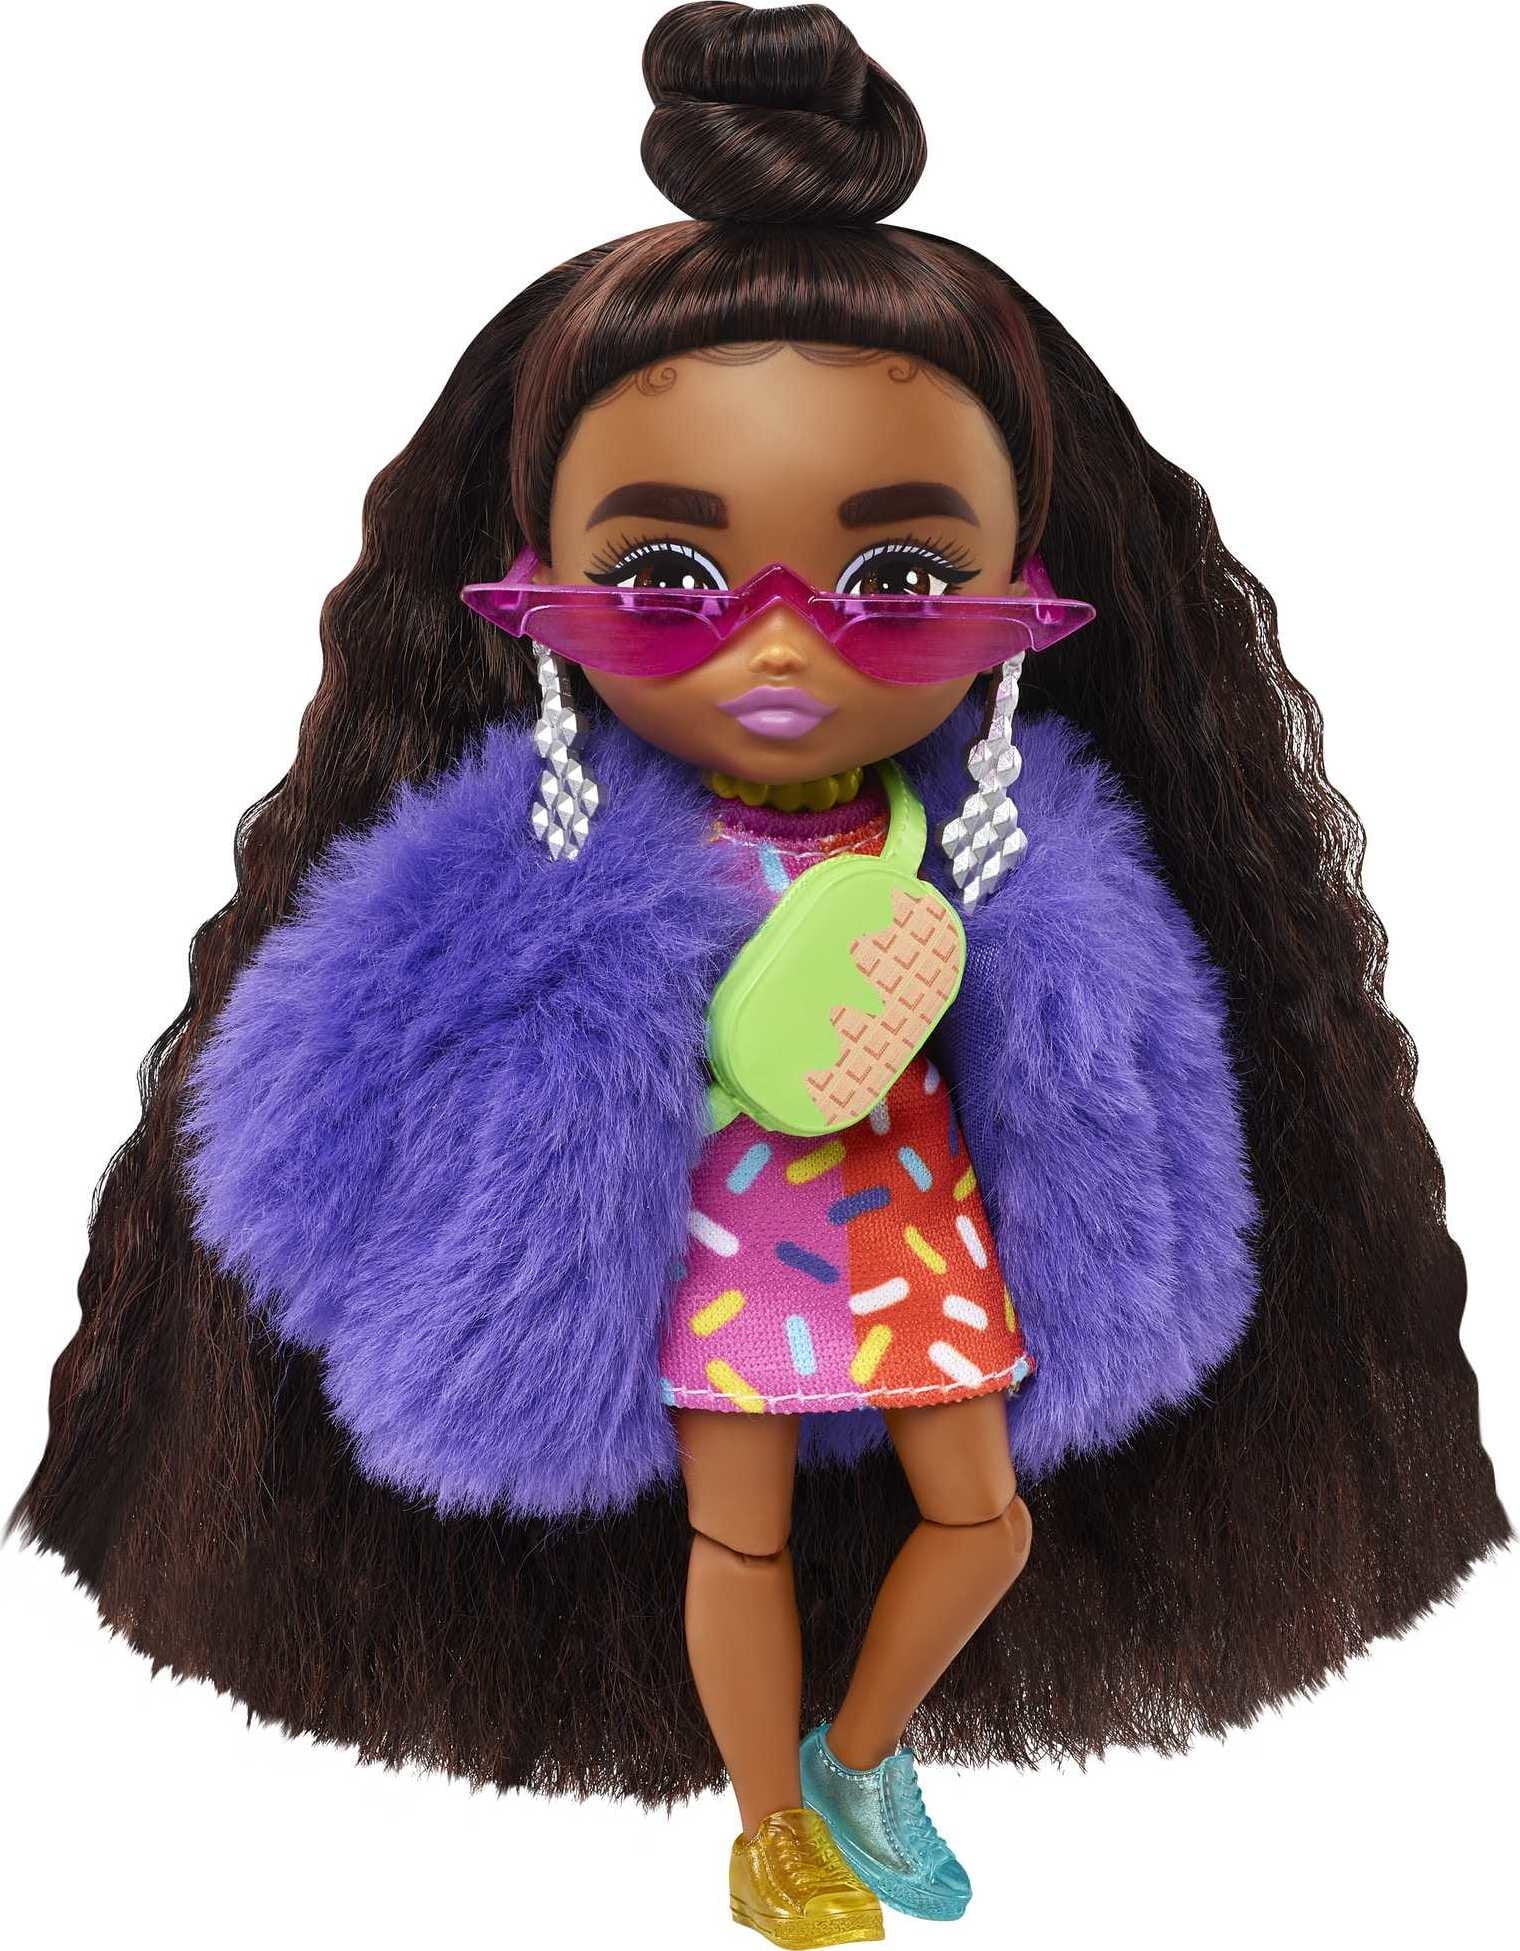 Barbie Extra Minis Doll #1 with Brunette Hair in Top Bun in Furry Coat ...